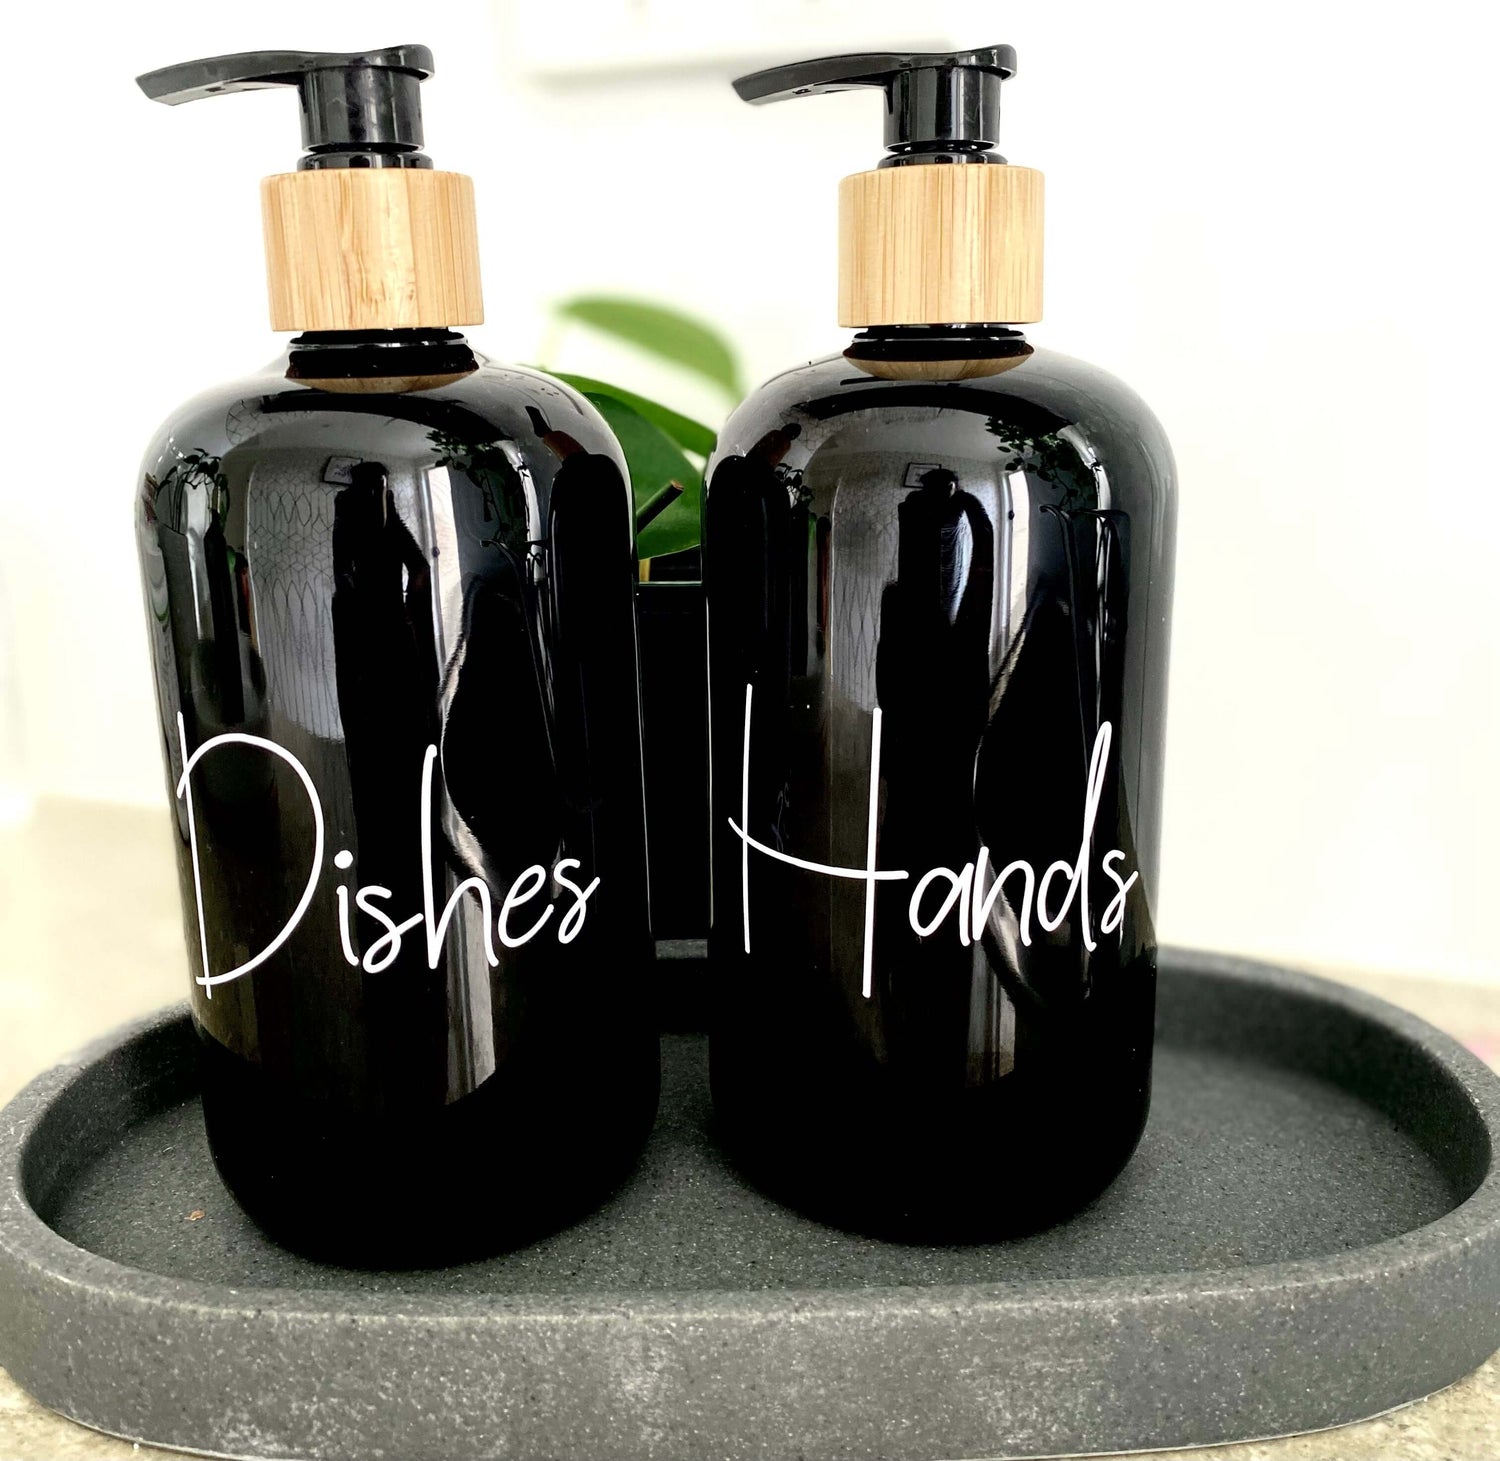 Dish Soap Dispenser and Hand Soap Dispenser with Bamboo Pump and